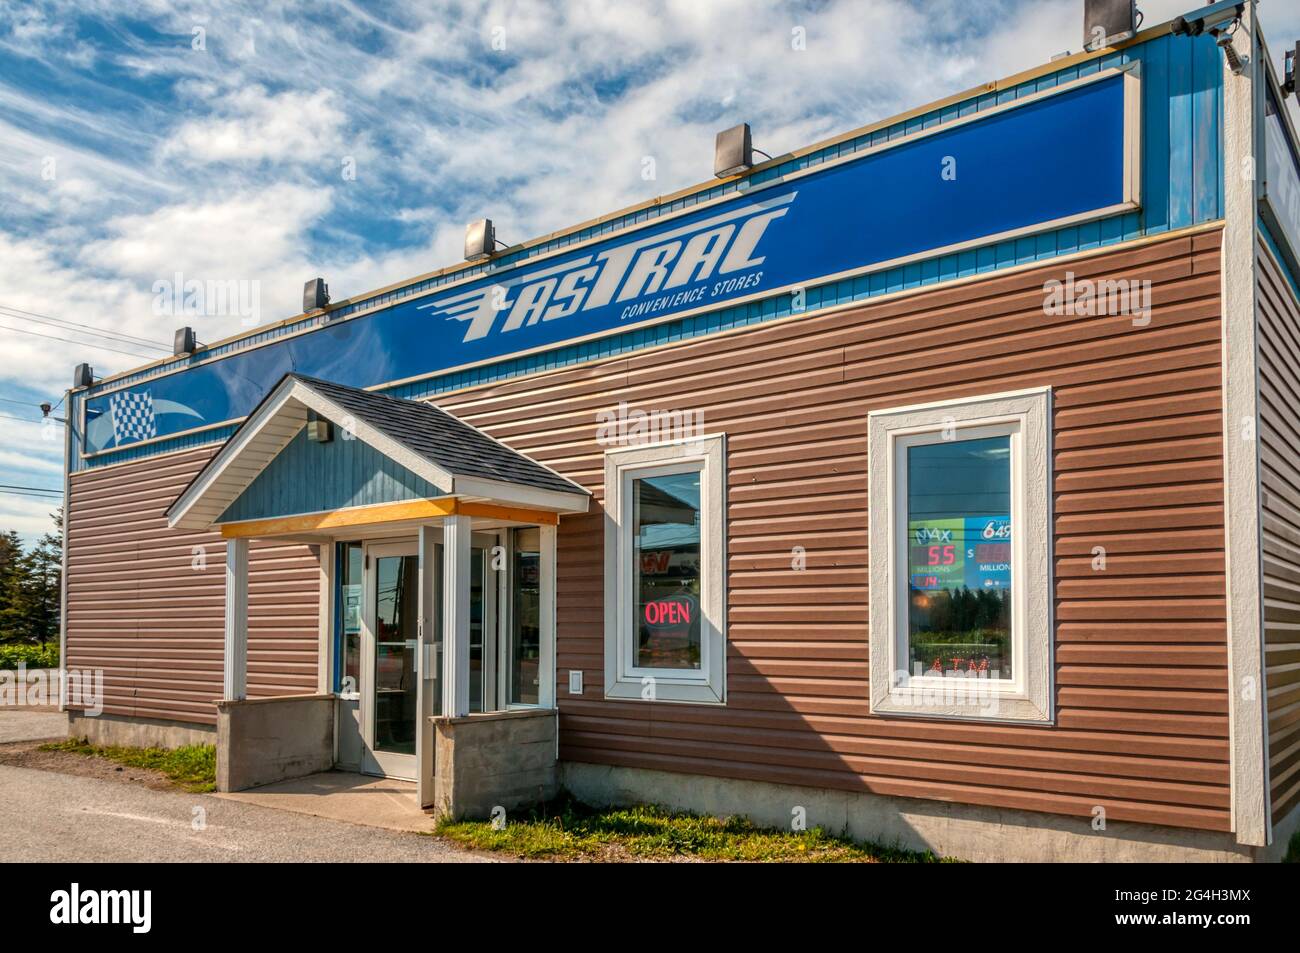 A branch of FasTrac convenience stores at Romaines, Newfoundland, in Canada. Stock Photo